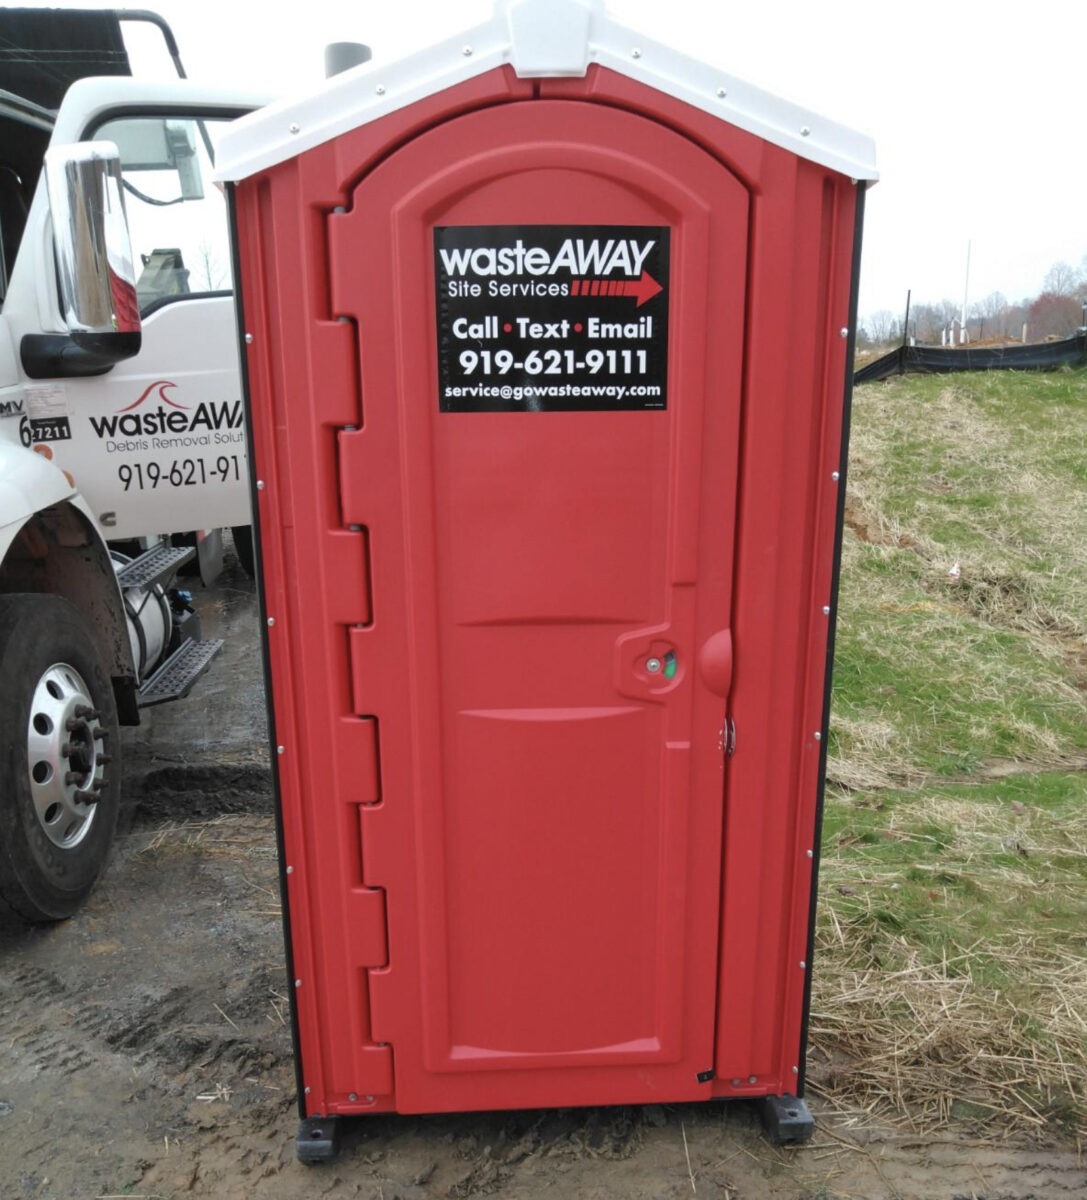 Porta Potty & Dumpster Rentals in Hillsborough, Smithfield, Raleigh, and Durham, NC, Fast, Dependable Dumpster & Porta Potty Rentals